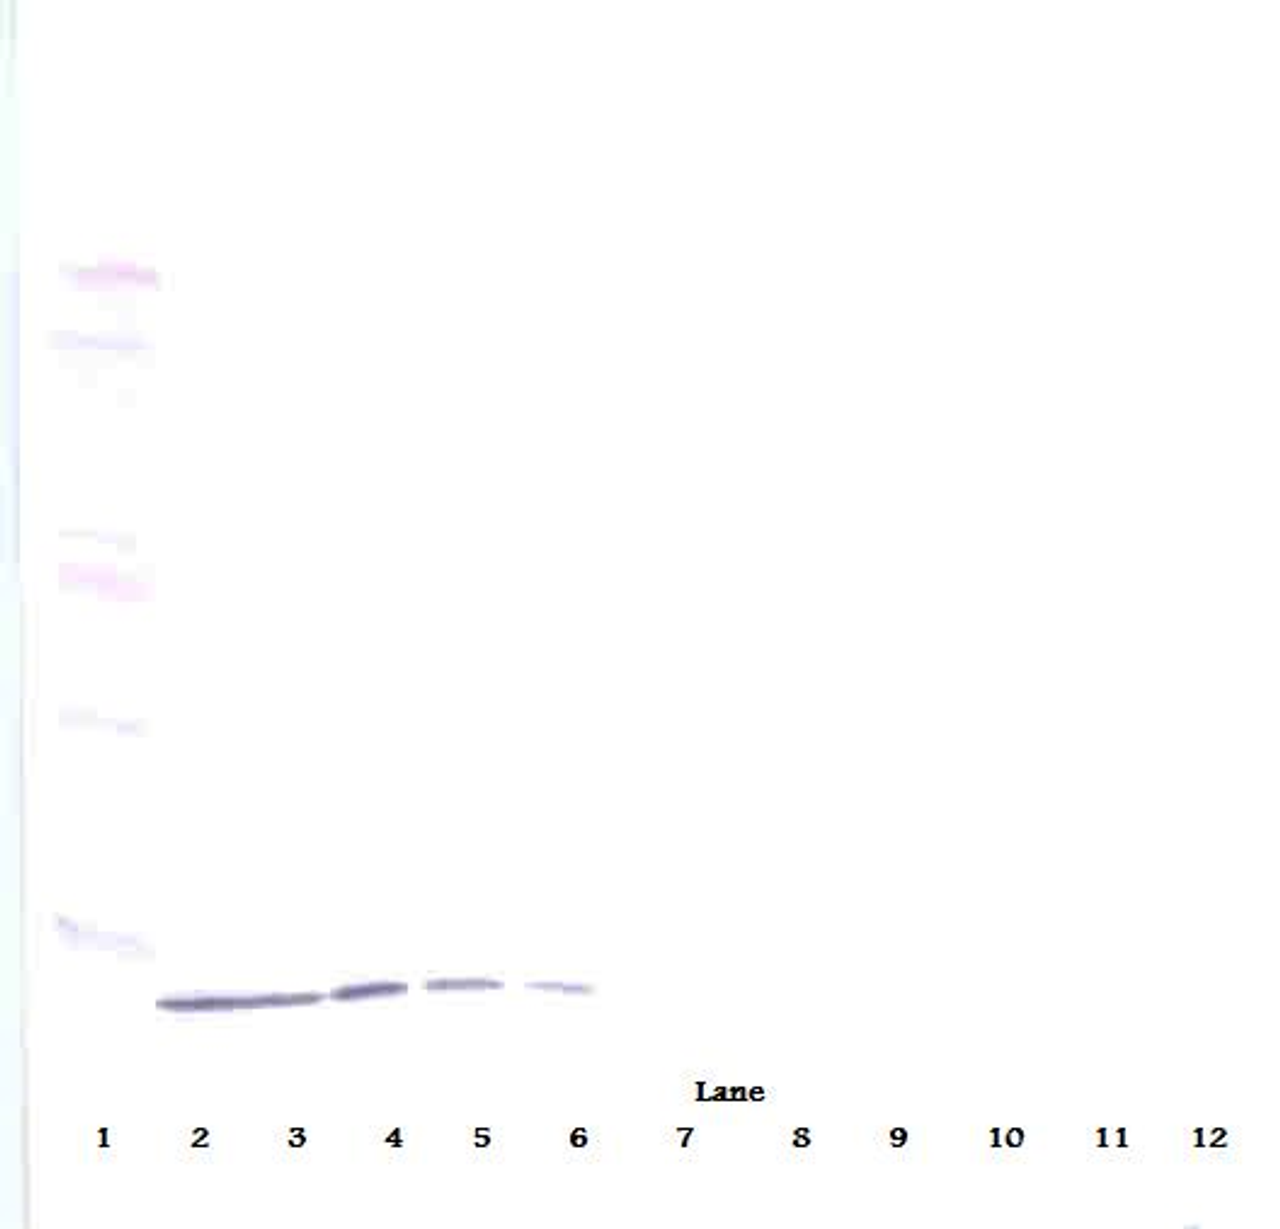 To detect Human IP-10 by Western Blot analysis this antibody can be used at a concentration of 0.25-0.50 ug/ml (non-reducing) or at a concentration of 1.0-2.0 ug/ml (reducing) . When used in conjunction with compatible secondary reagents the detection limit for recombinant Human IP-10 is 0.20-0.40 ng/lane under non-reducing conditions and 2.00-4.00 ng/lane under reducing conditions.